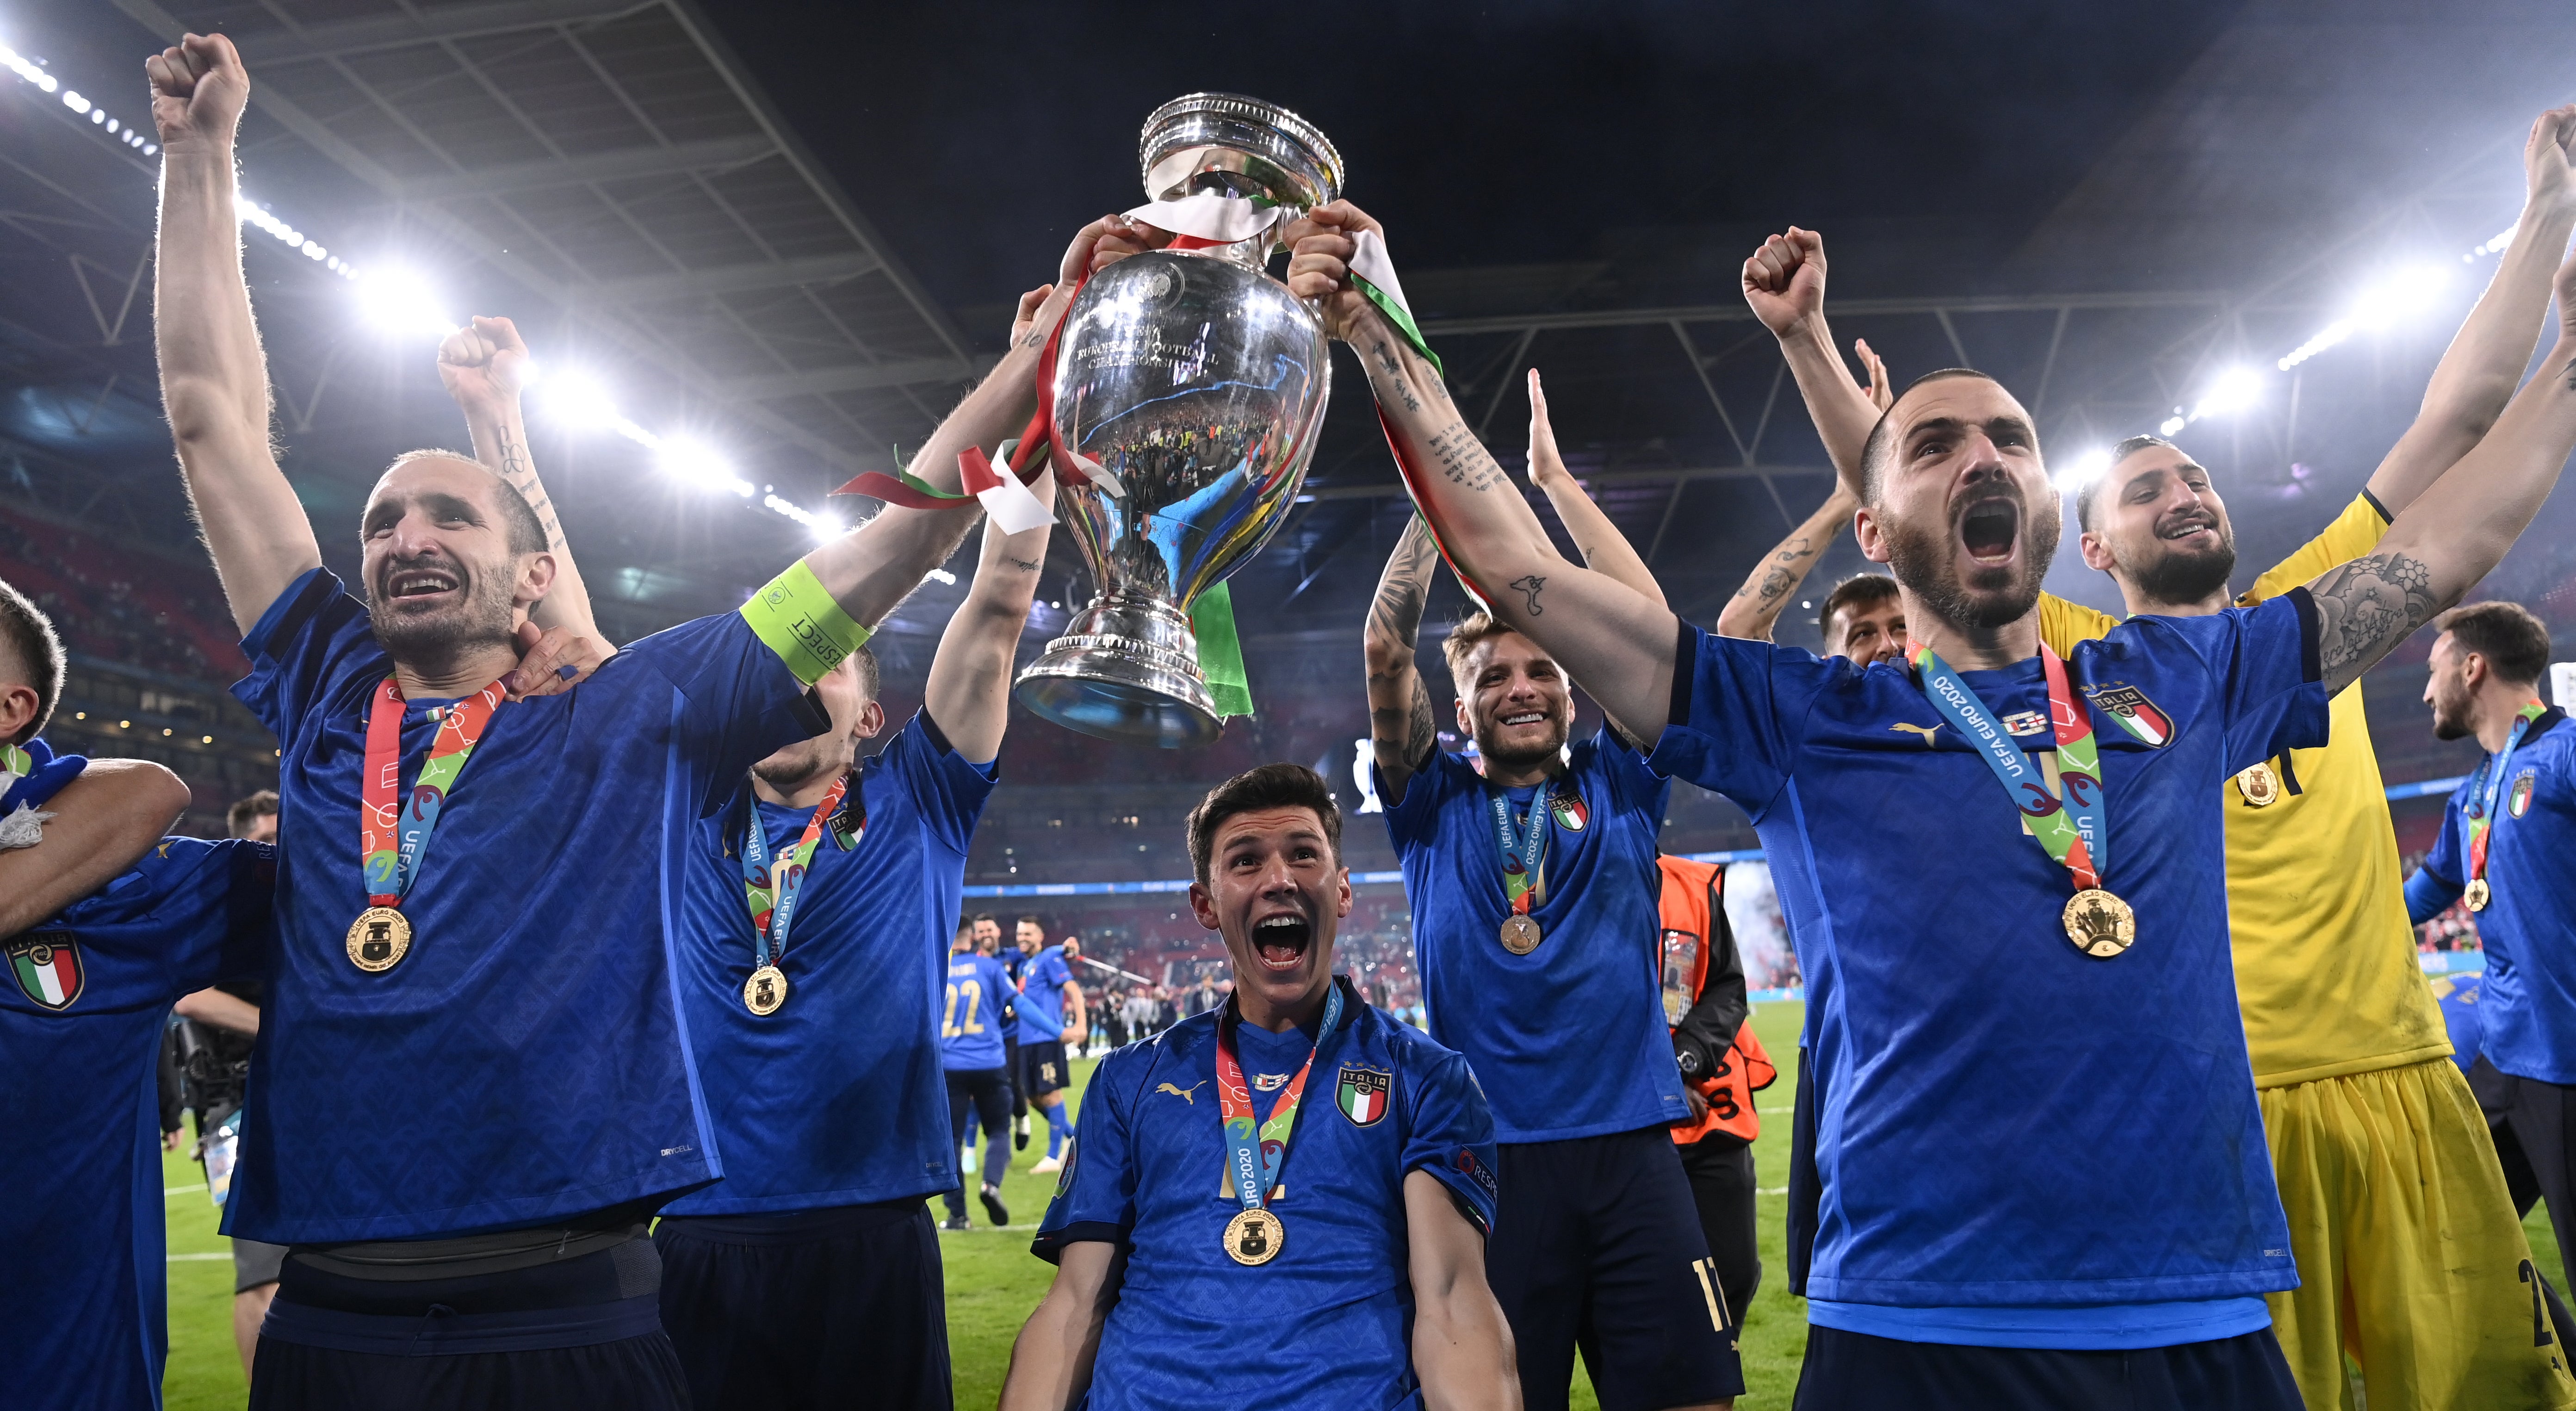 The success of the rearranged Euro 2020 tournament, won by Italy, was a factor in driving the recovery of European football markets (PA)